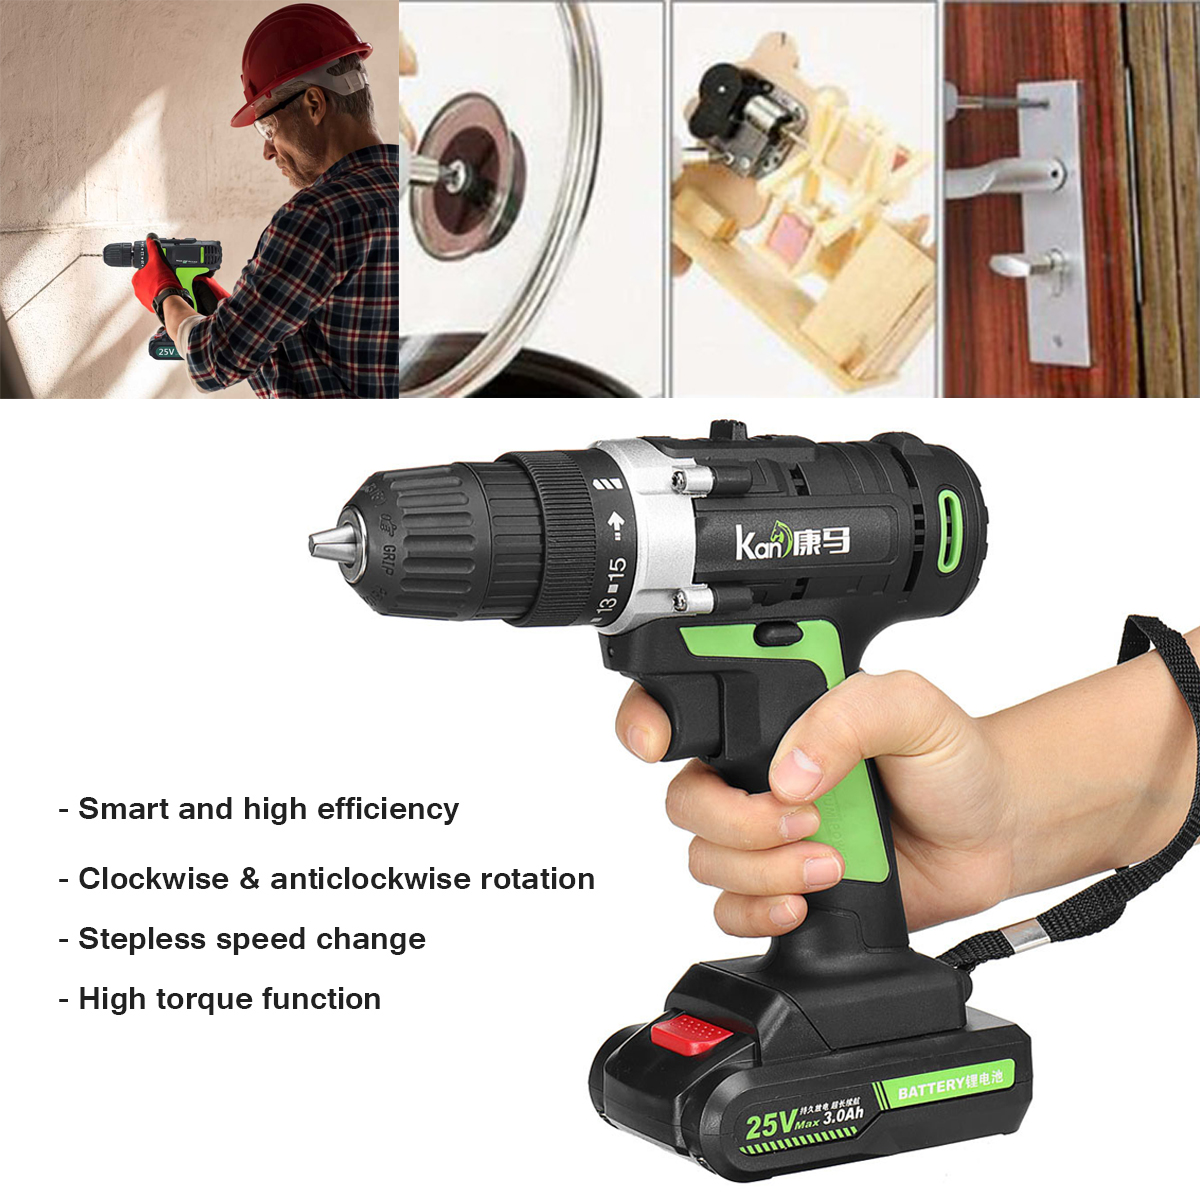 25V-Electric-Screwdriver-30Ah-Li-ion-Battery-Rechargeable-Cordless-Drill-2-Speed-1400630-2